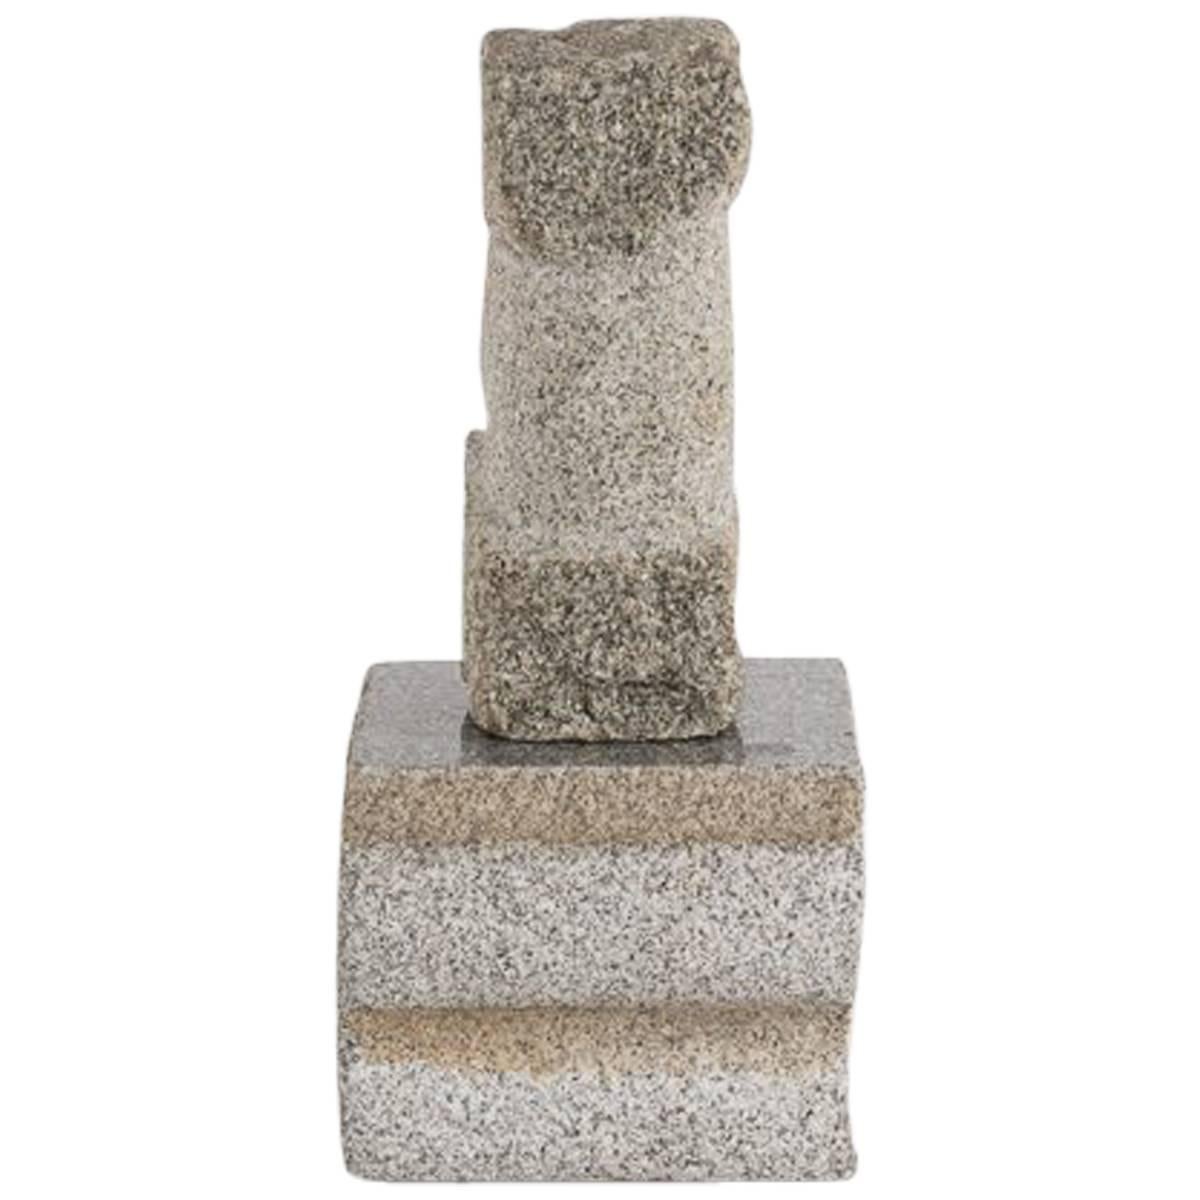 Yongjin Han, Two Pieces of Granite, Sculpture, United States, 2005